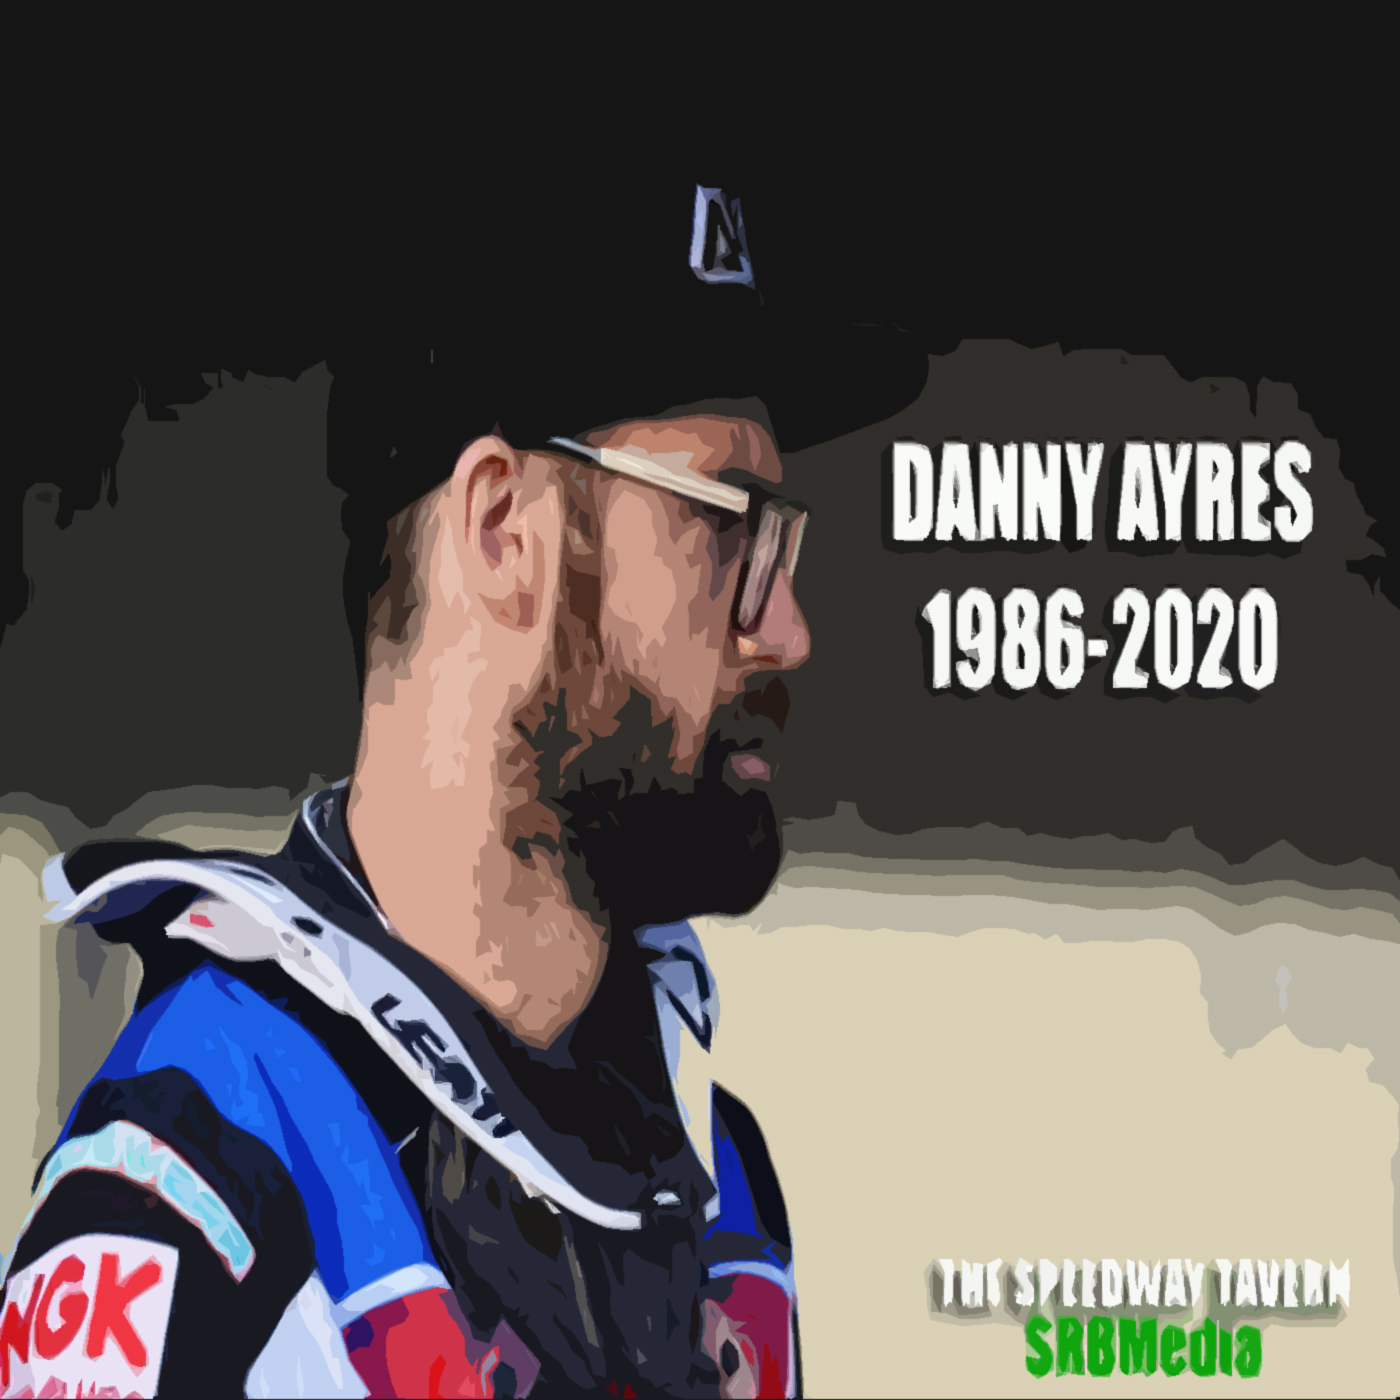 The Speedway Tavern-Danny Ayres Tribute